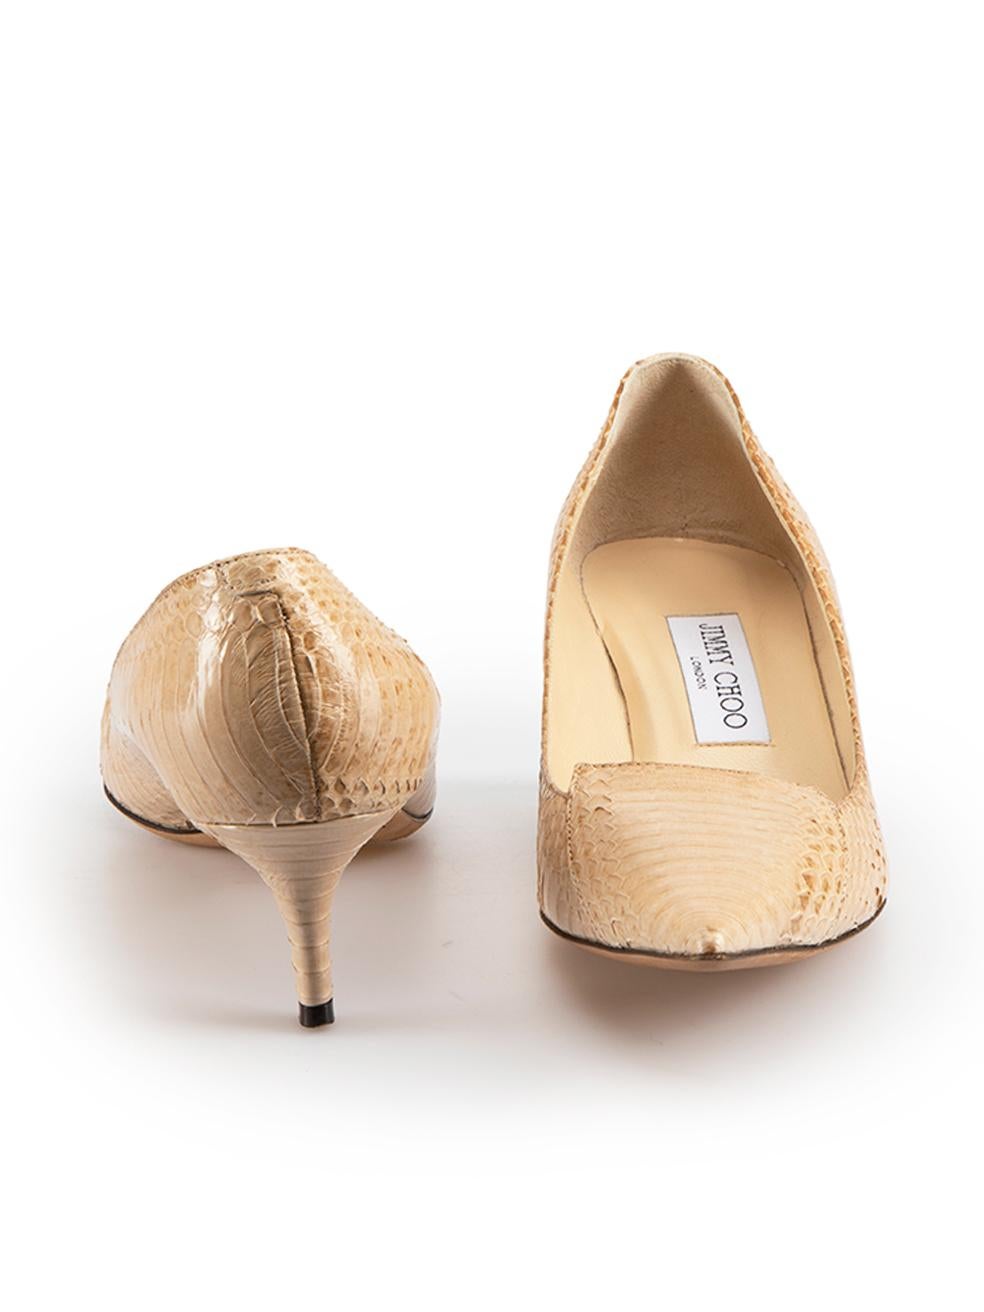 Jimmy Choo Beige Python Pointed Toe Pumps Size IT 37.5 In Excellent Condition For Sale In London, GB